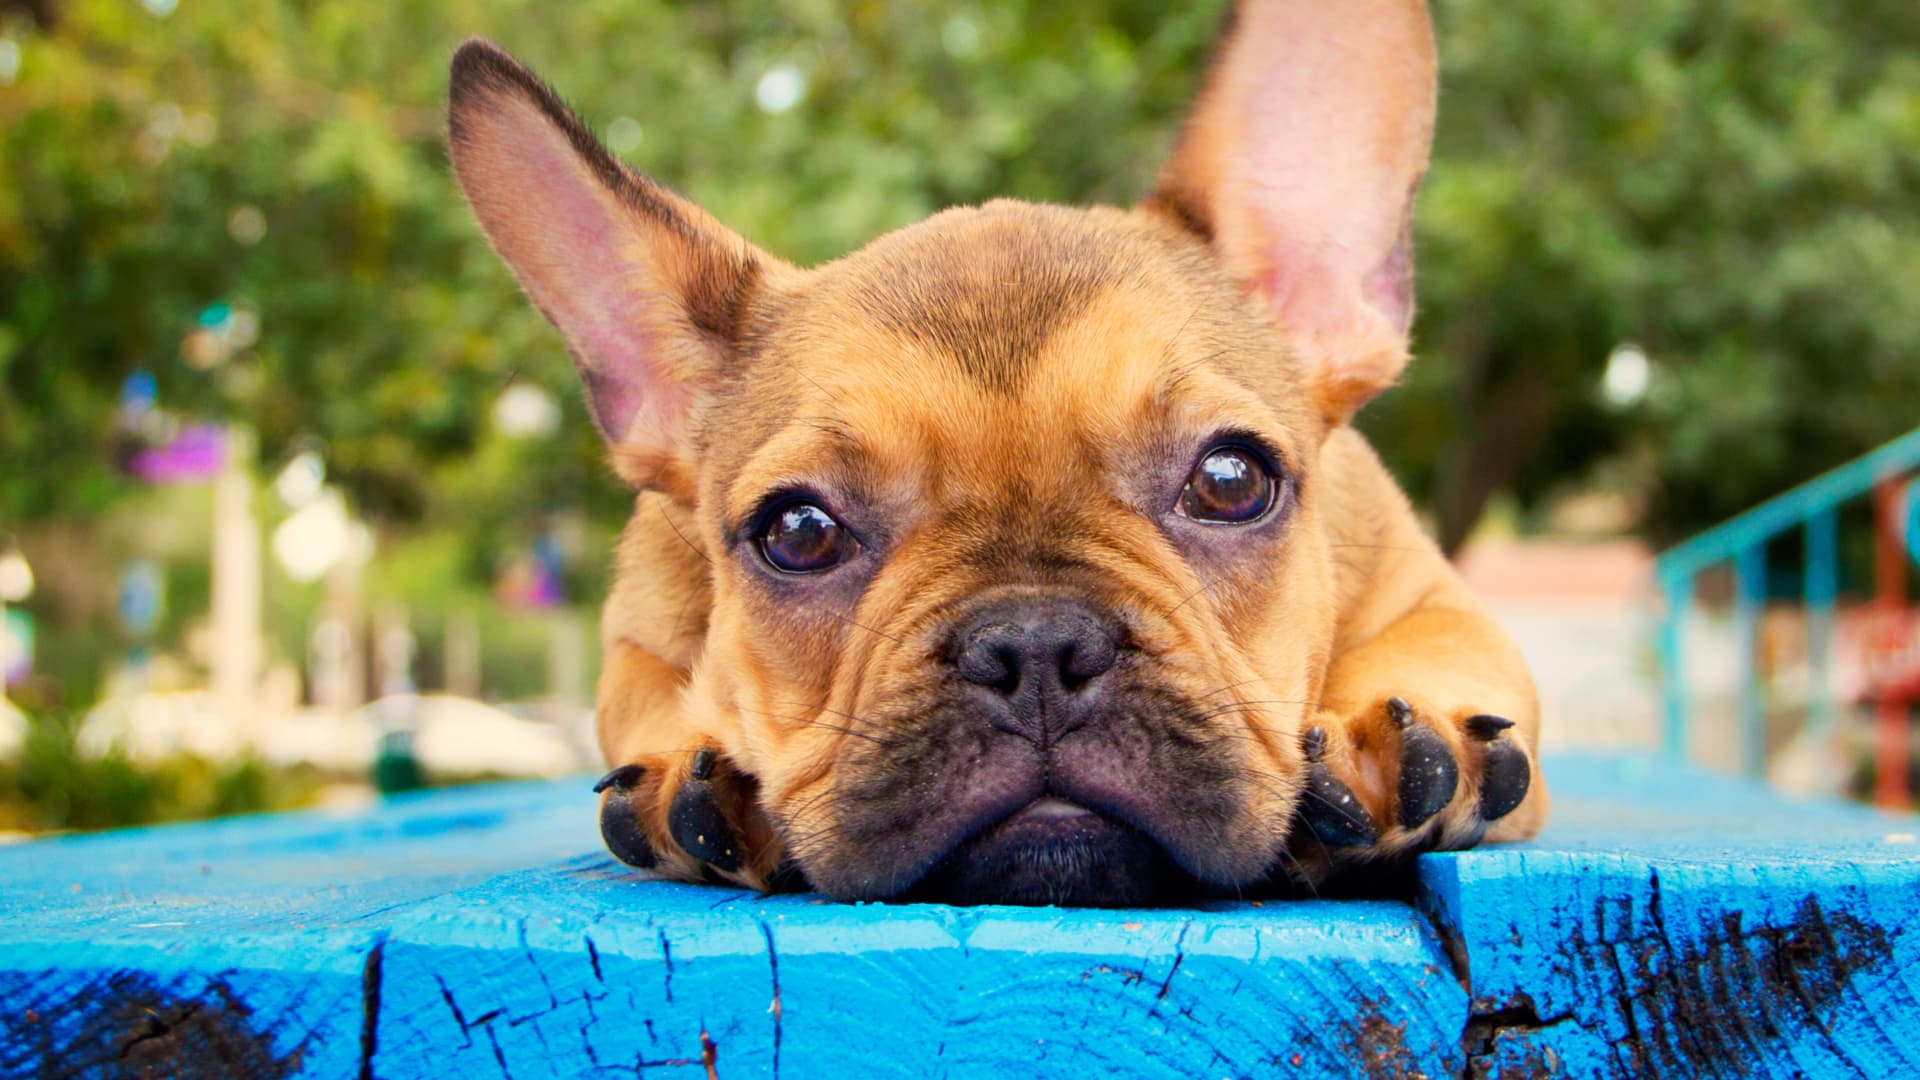 According to the American Kennel Club, French Bulldog registrations increased by over 1,000% from 2012 to 2022.